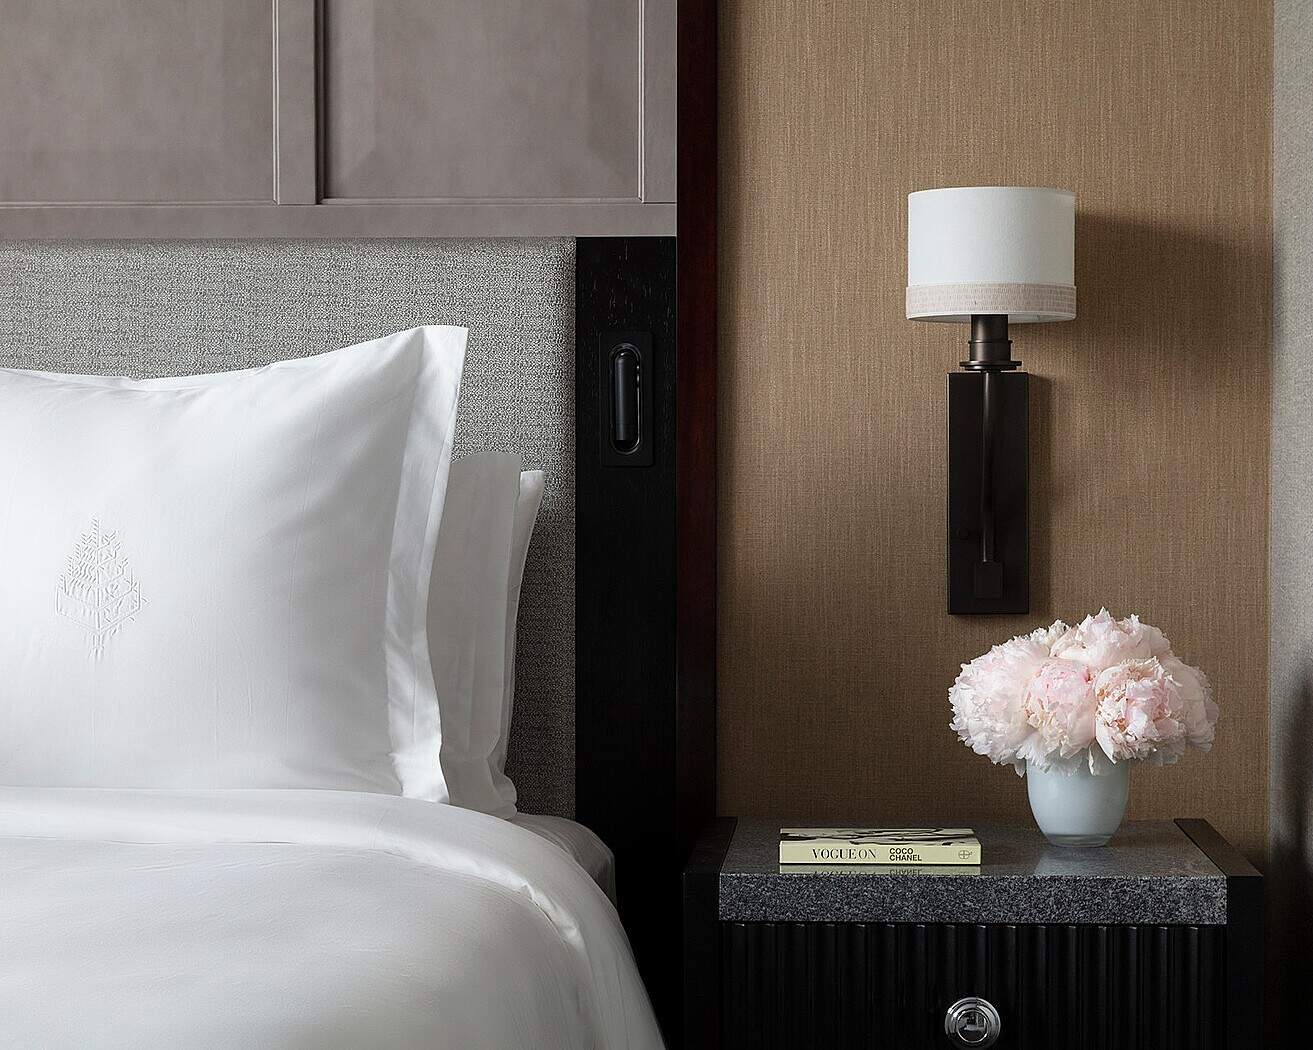 For a better night's sleep the Four Seasons hotel in Boston's Back Bay offers a variety of pillows including feather, non-feathered and horsehair. (Courtesy Four Seasons)